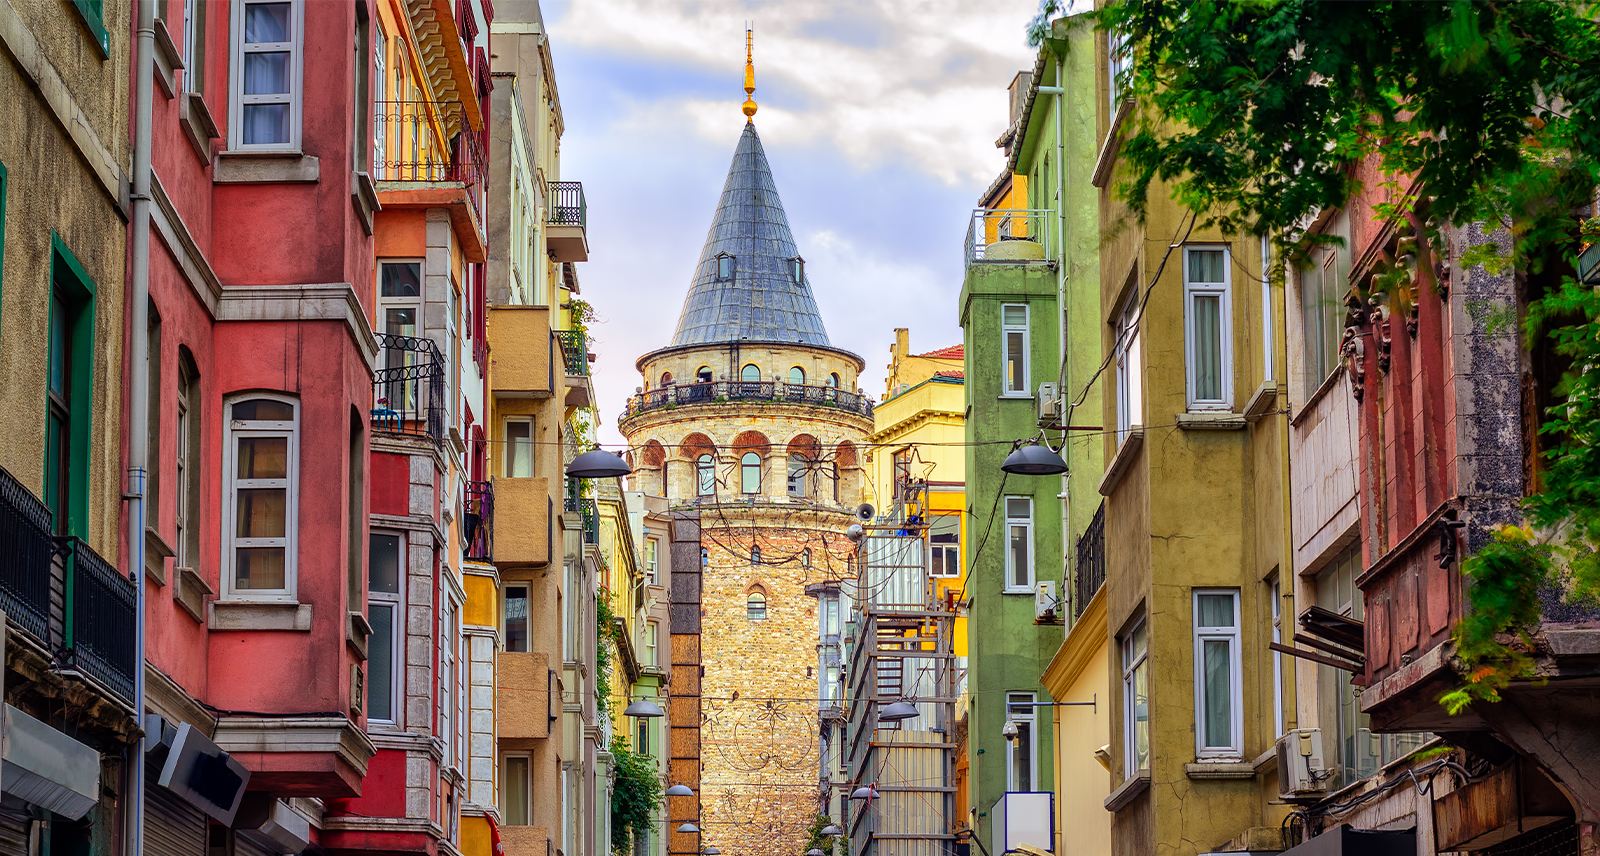 View of Istanbul from the street, a tower is framed by old houses that line the street